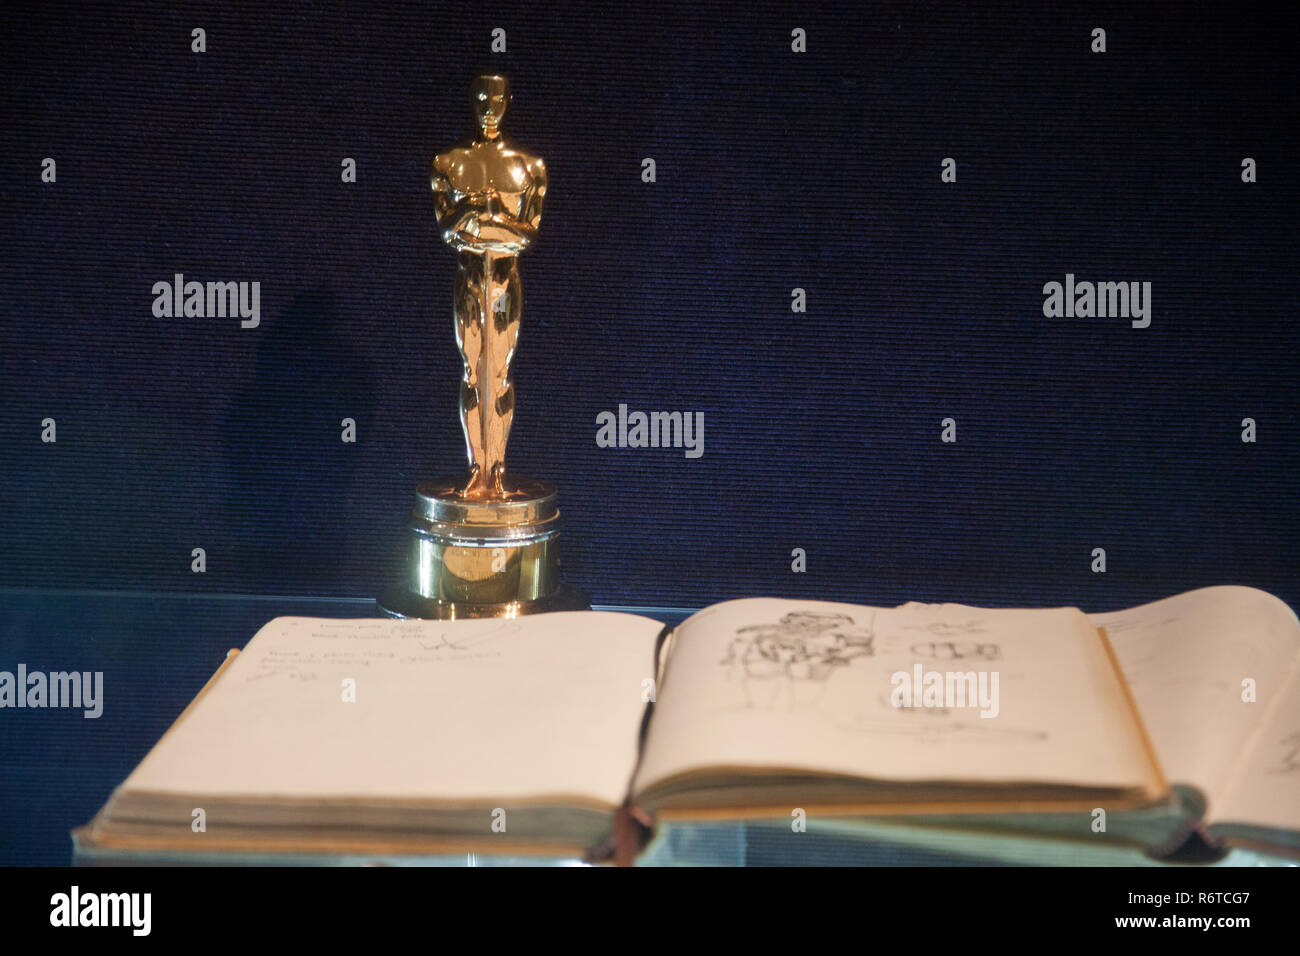 London UK. 6th December 2018. The  original Oscar statue won by British Costume designer Tom Mollo who designed the original Star Wars characters in the sketchbook that will be auctioned at Bonhams Credit: amer ghazzal/Alamy Live News Stock Photo